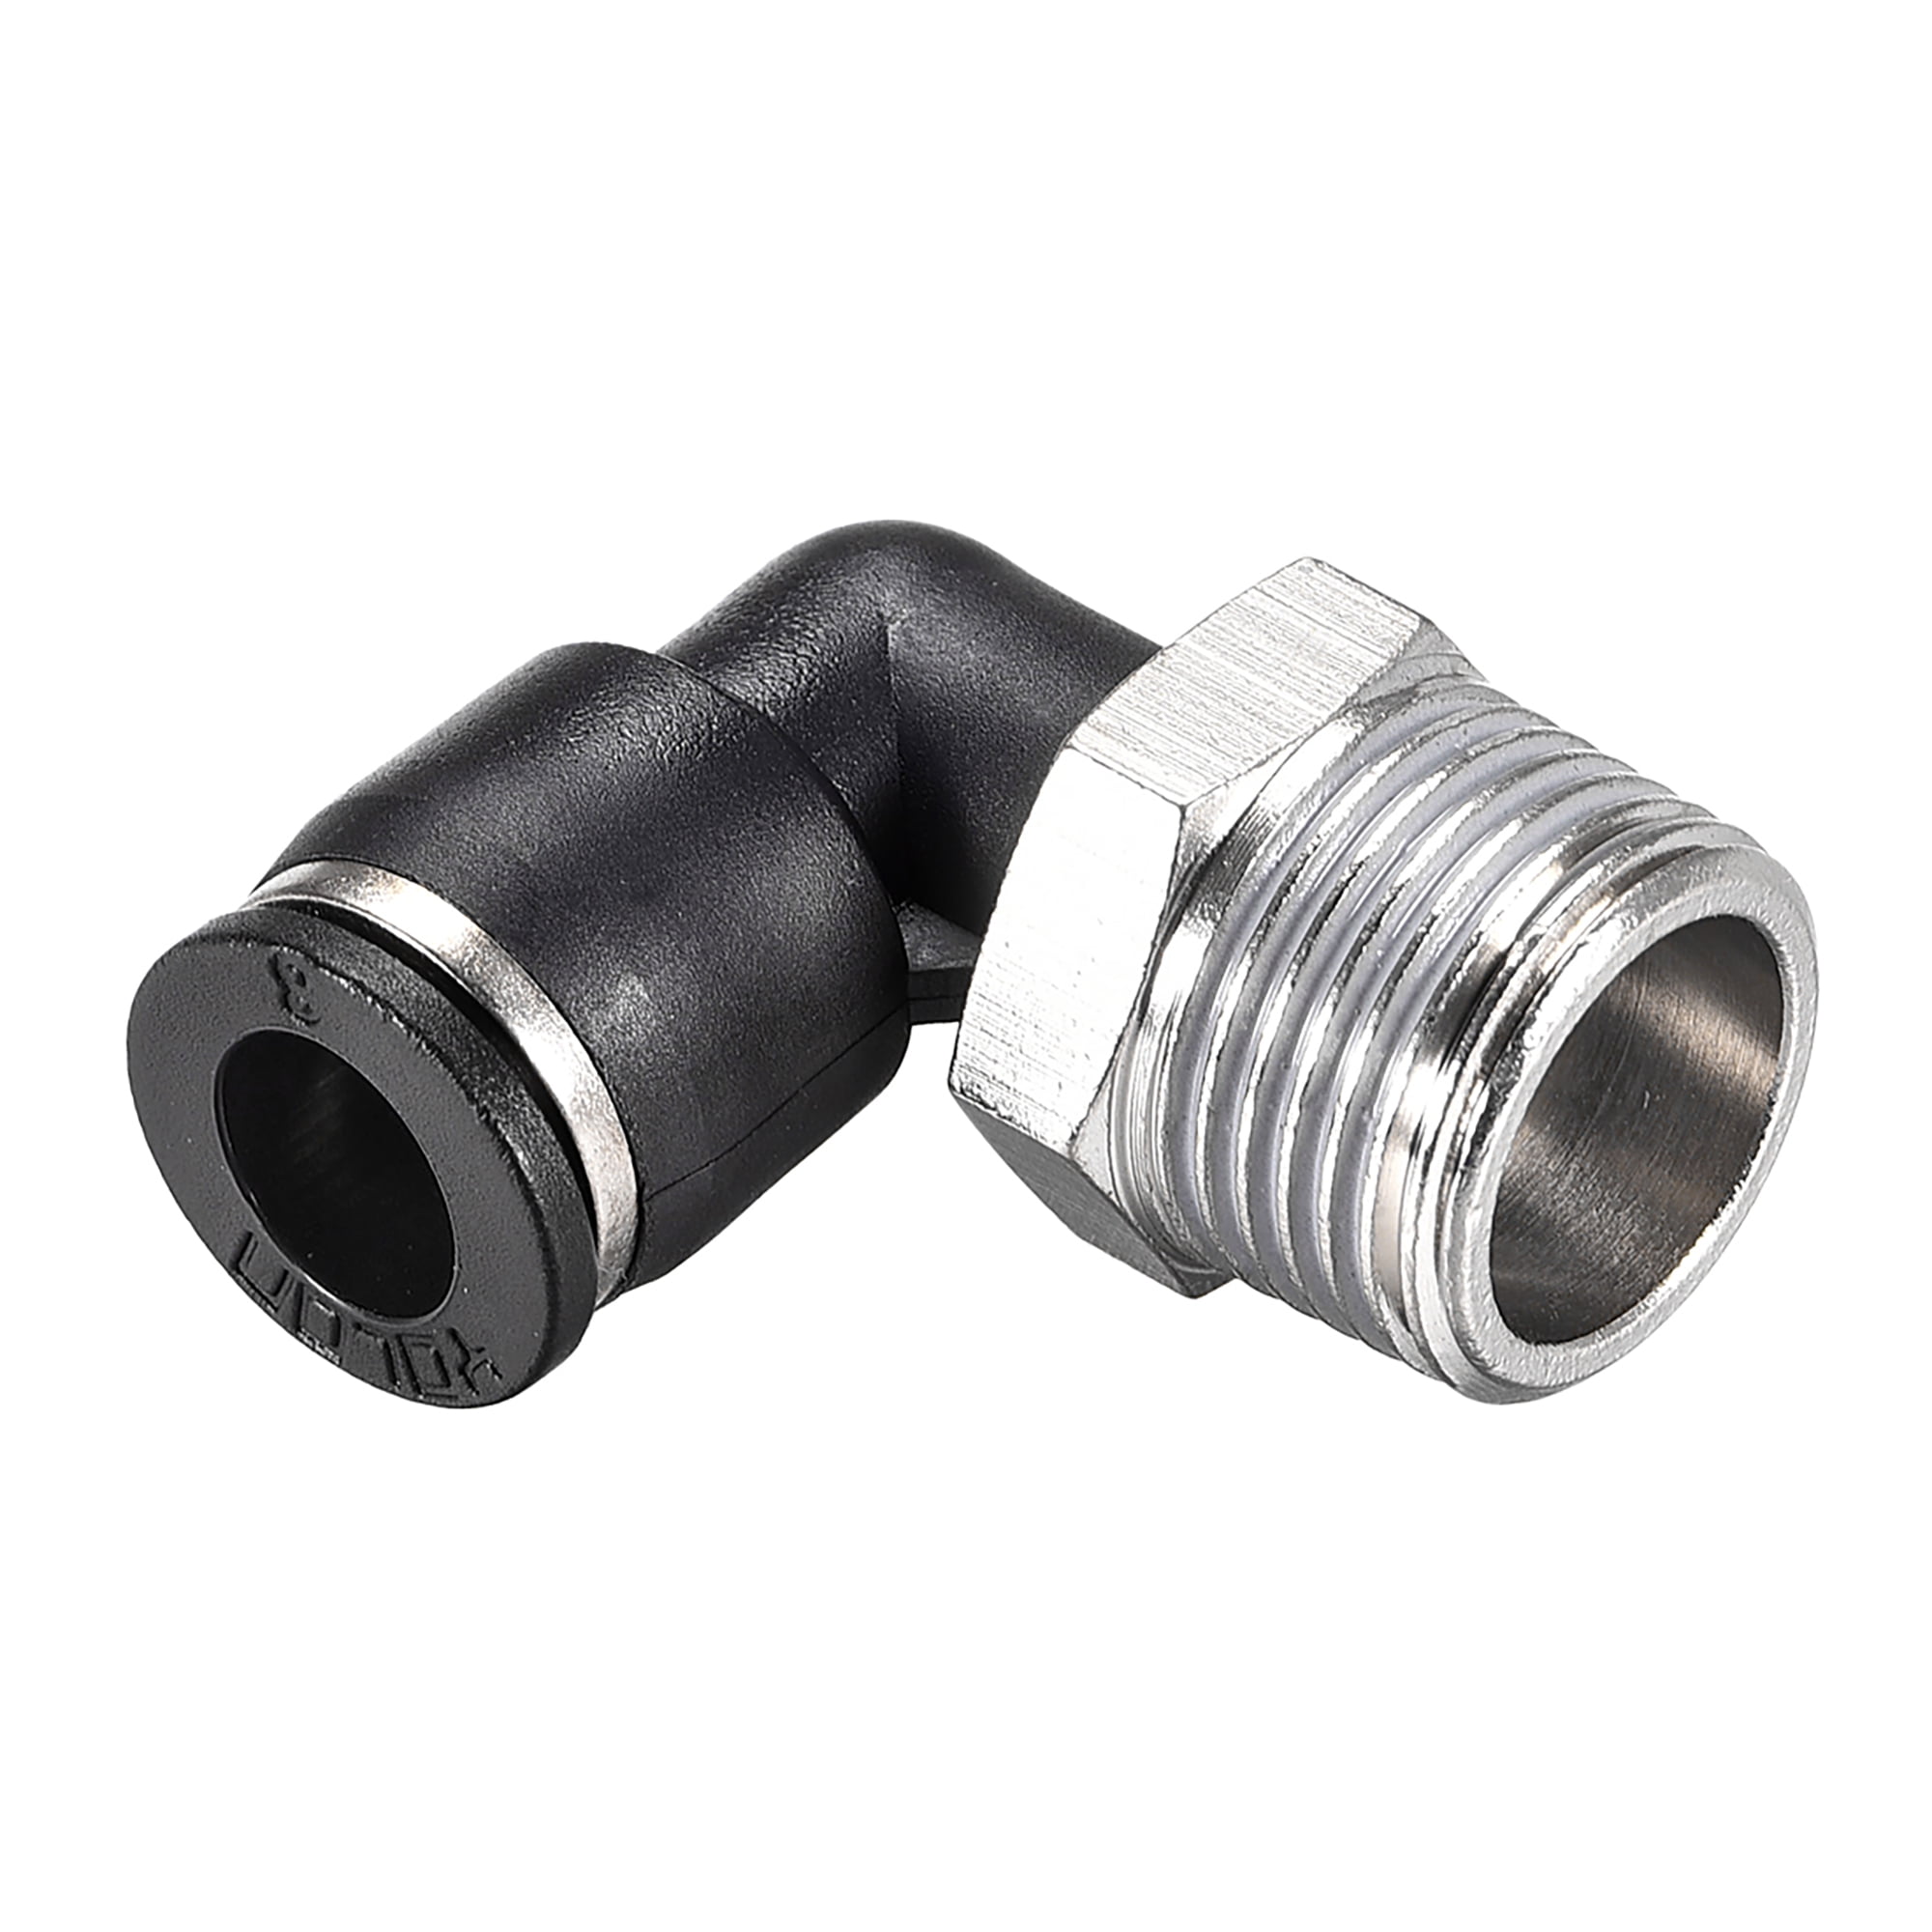 5/32 Tube X 1/8 NPT - Pack of 5 PneumaticPlus PN15 Series Push to Connect Tube Fitting Male Elbow 